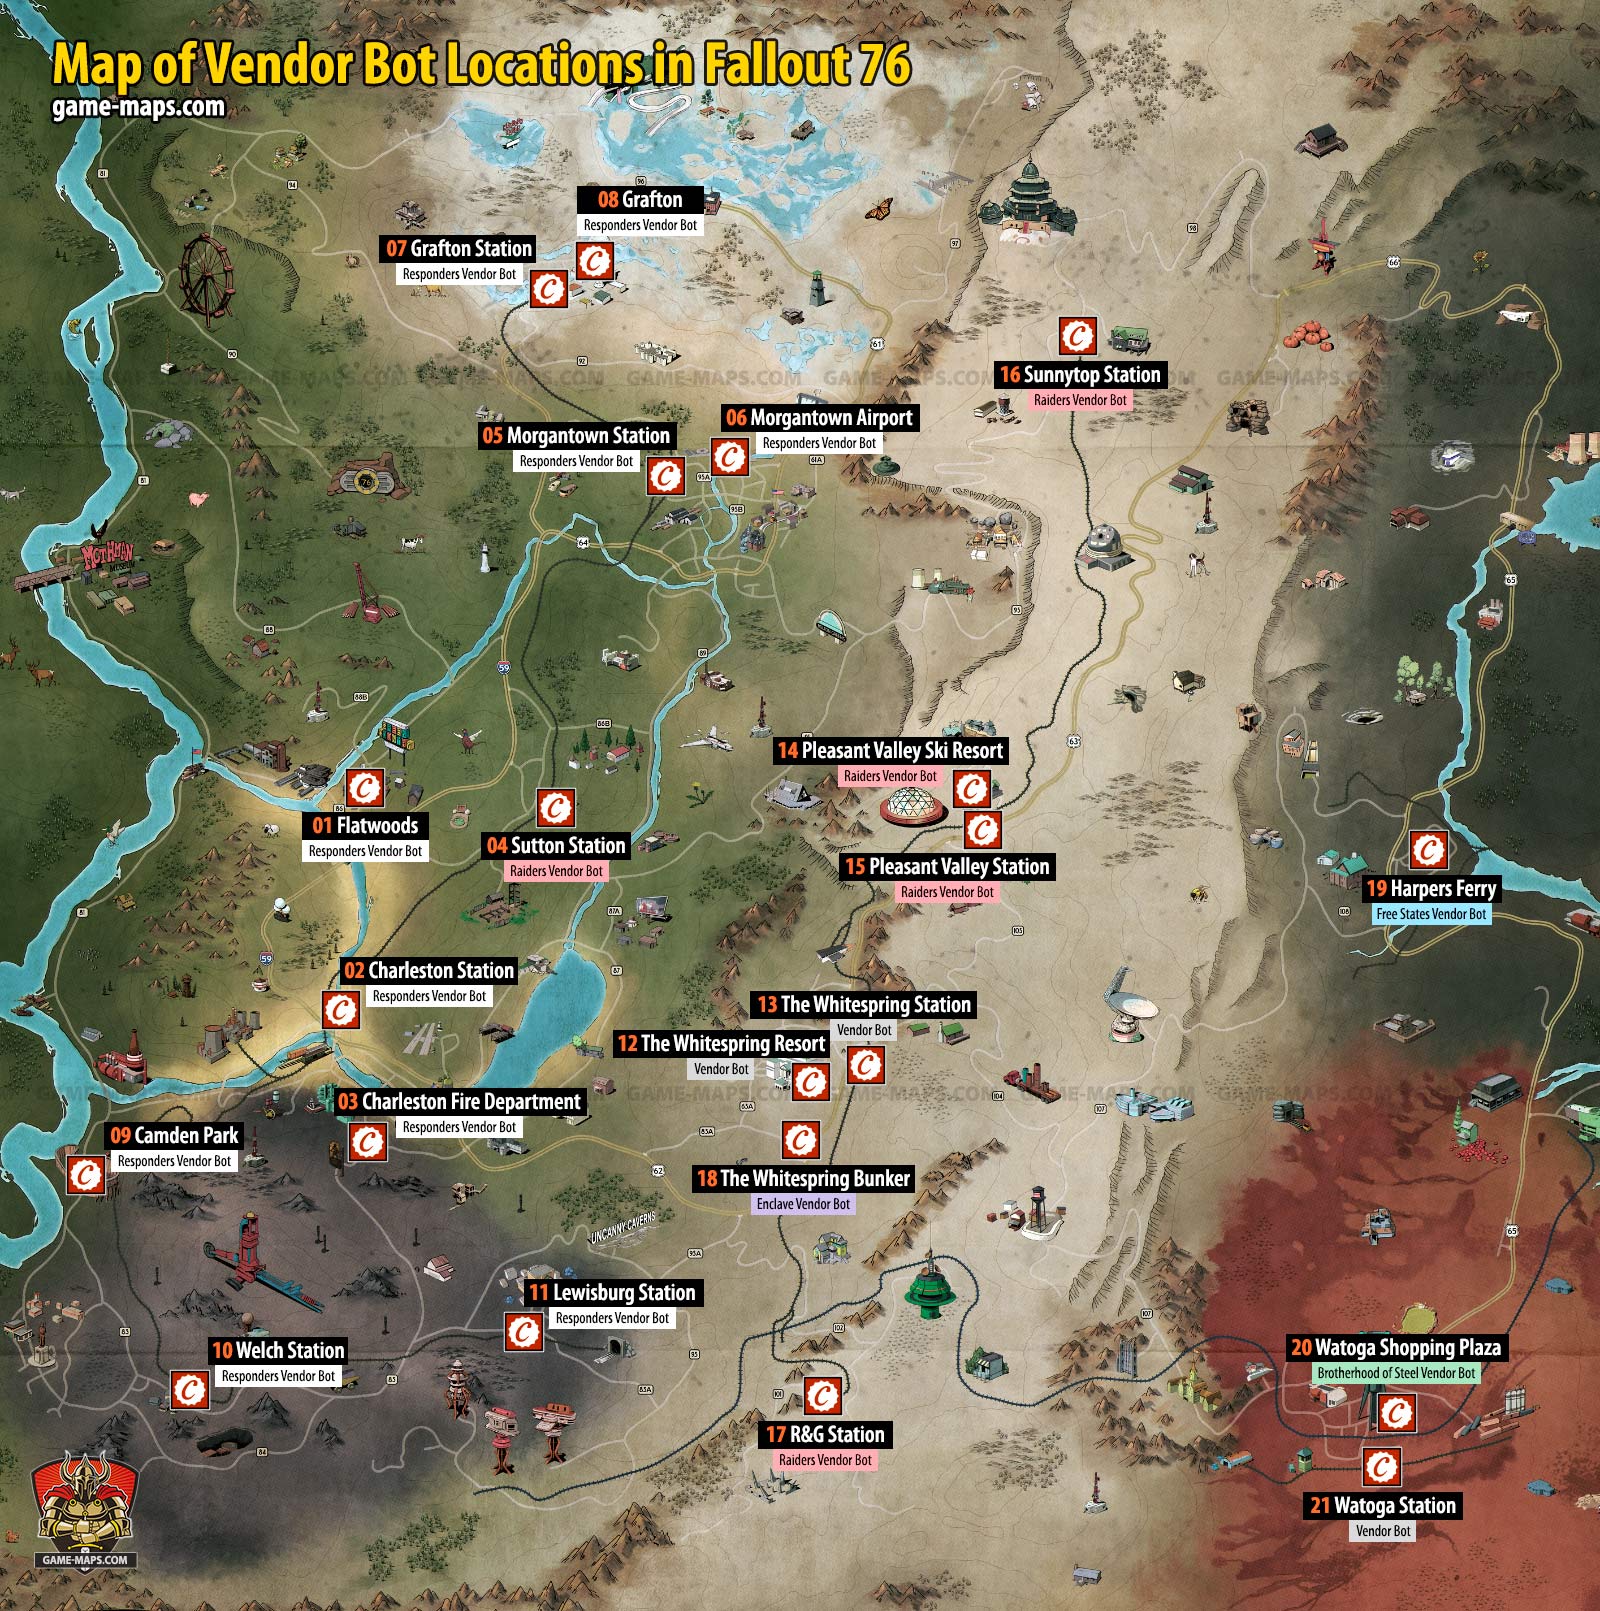 Map of Vendor Bot Locations in Fallout 76